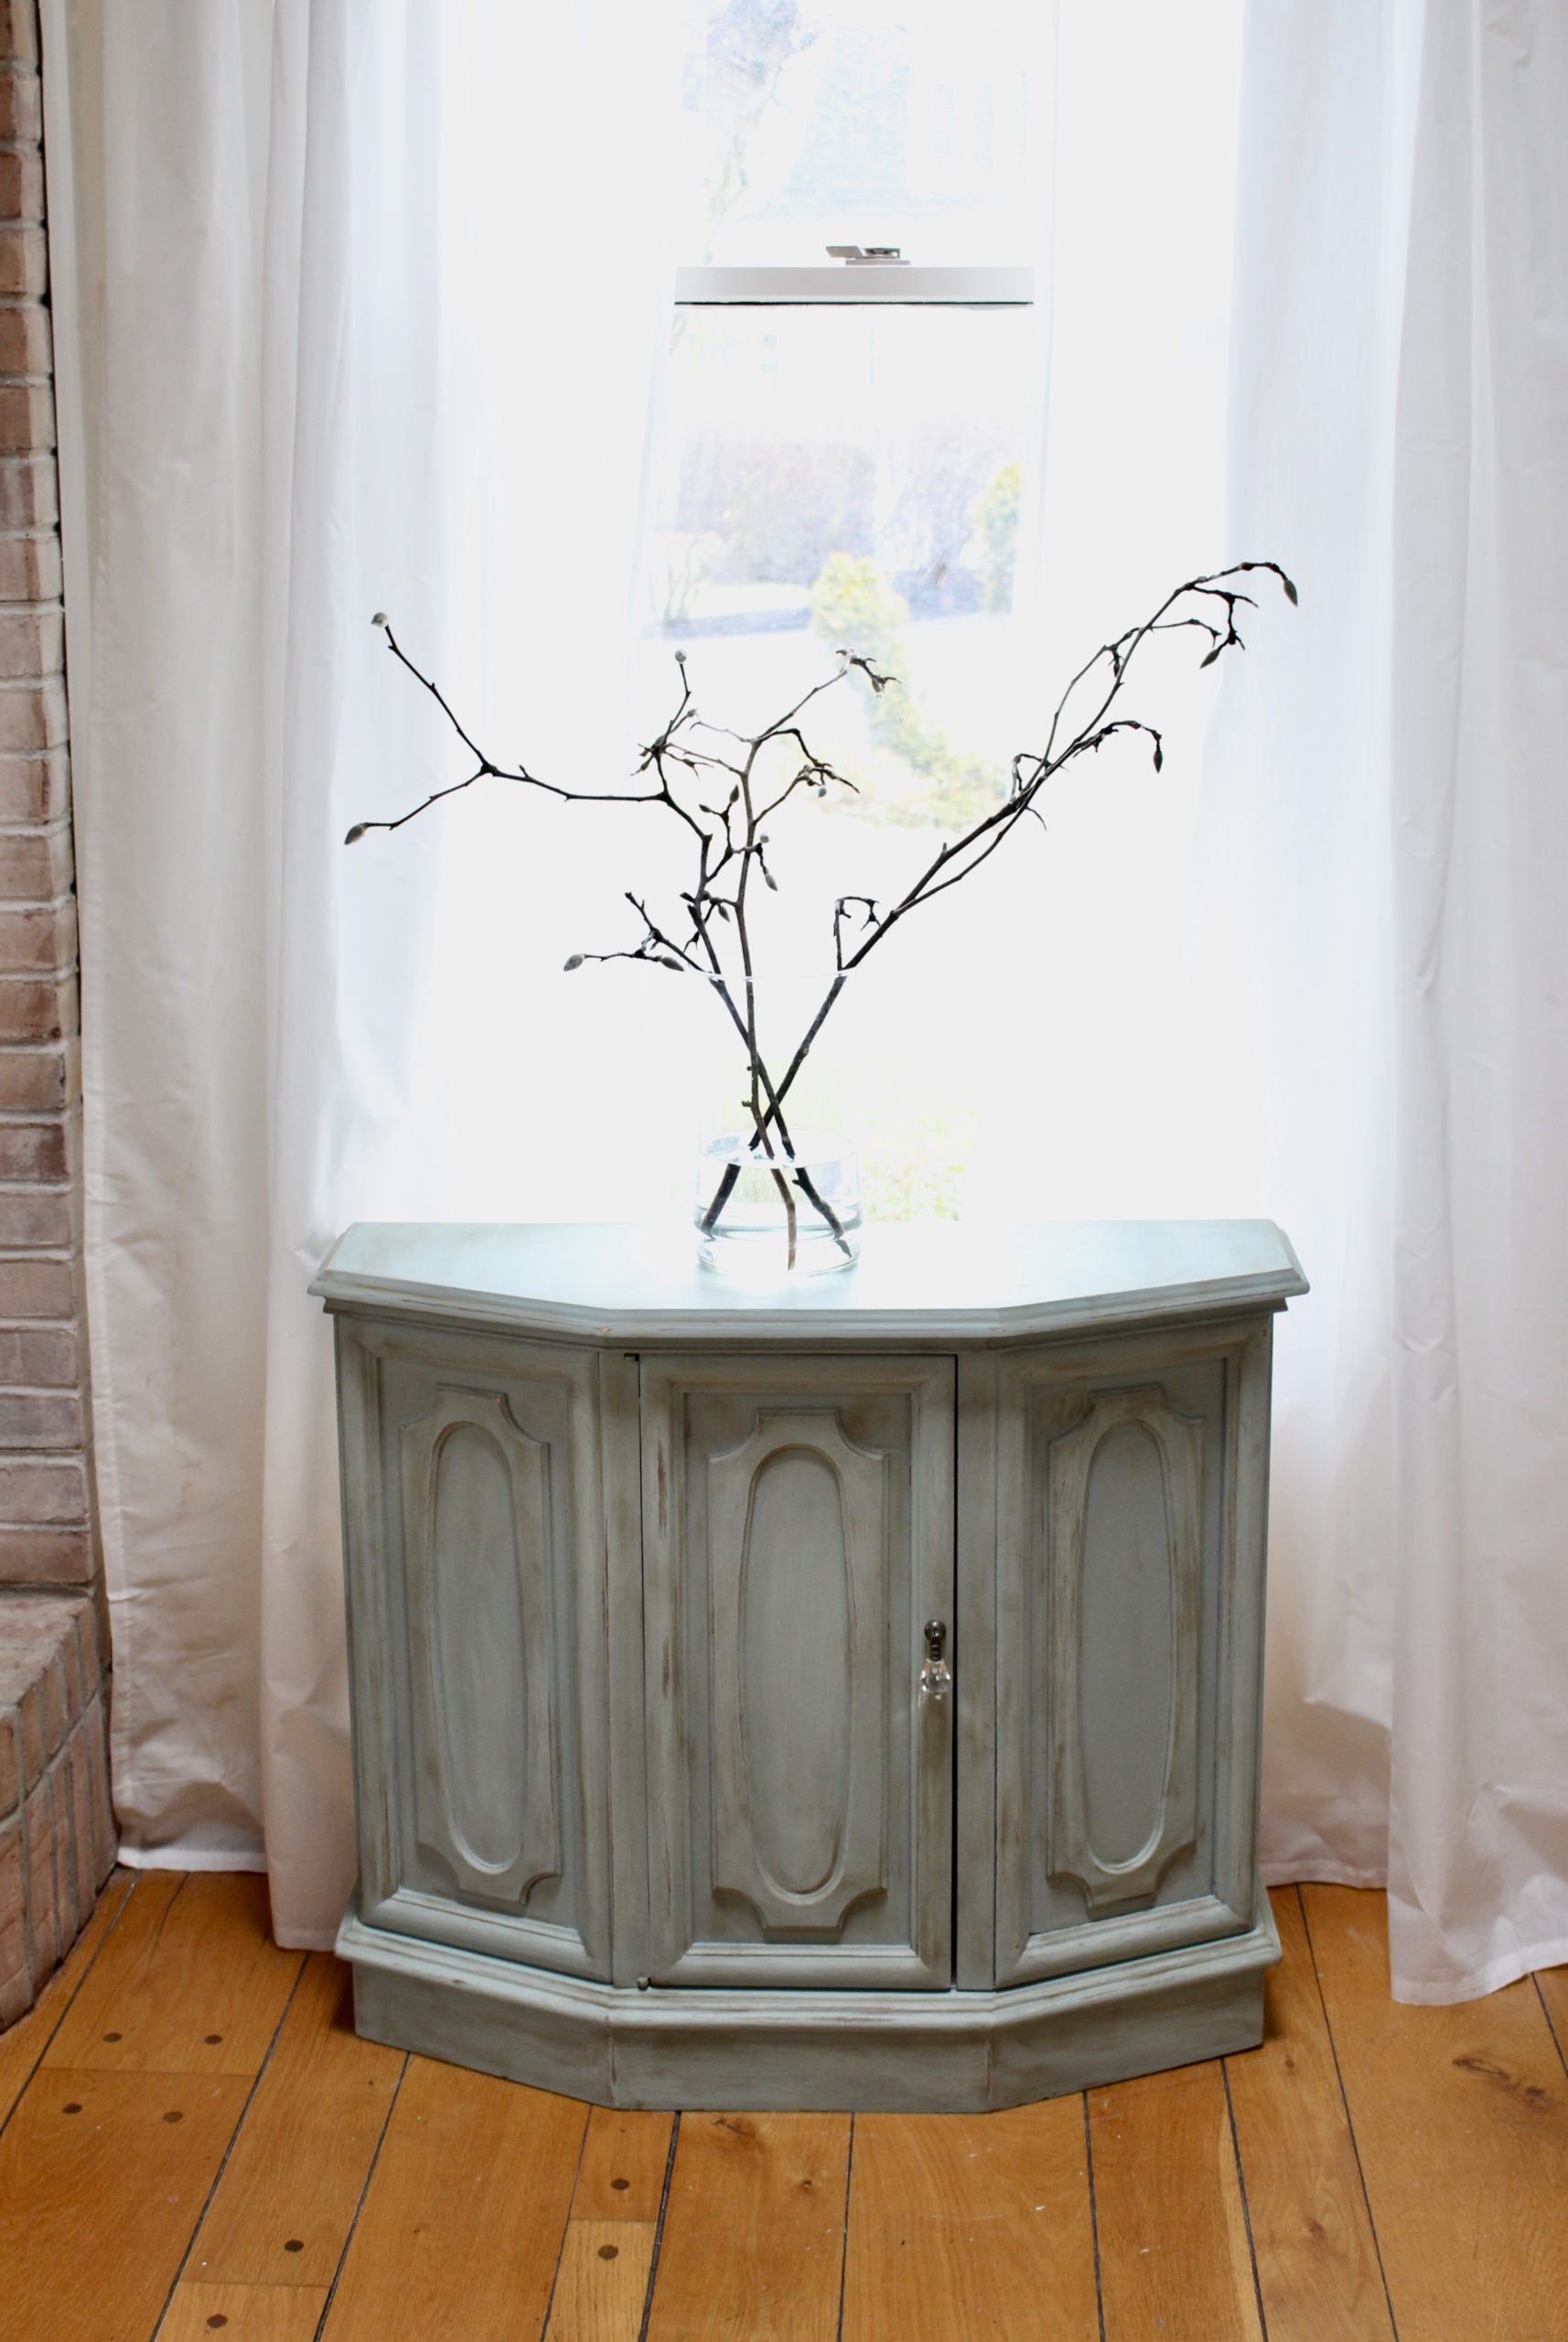 Green Painted Cabinet from a Thrift Store- thrift store finds- painting furniture- how to paint furniture using chalk paint- green painted furniture- green decor